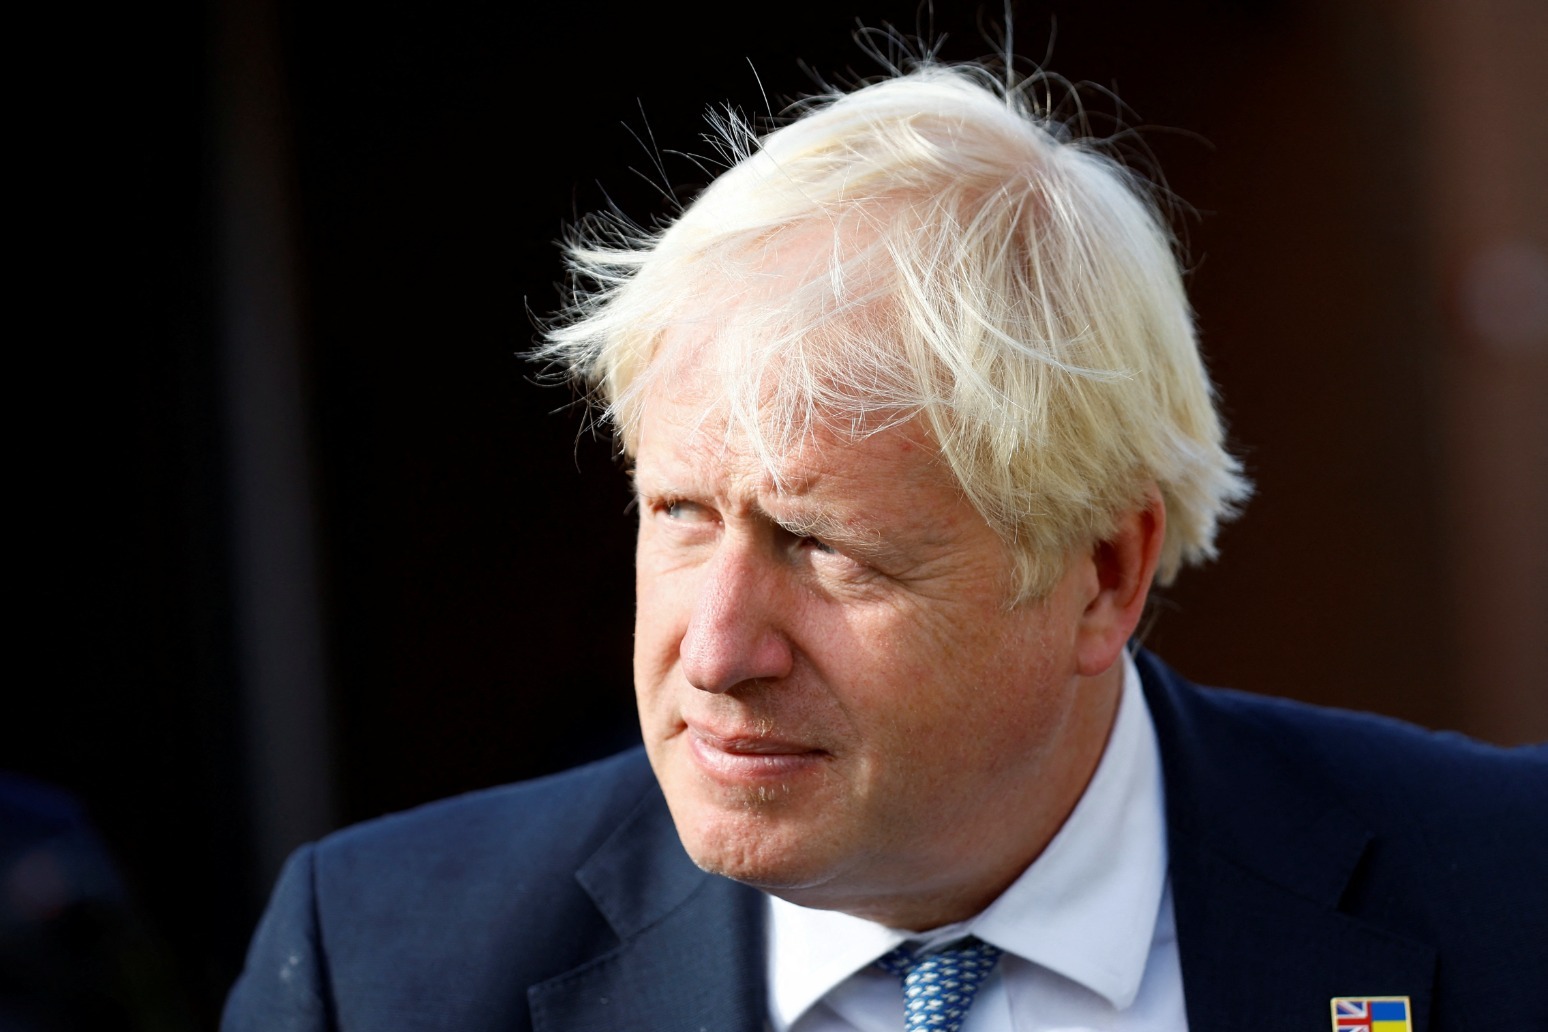 Johnson had cousin act as ‘guarantor for an £800,000 credit facility’ while PM 